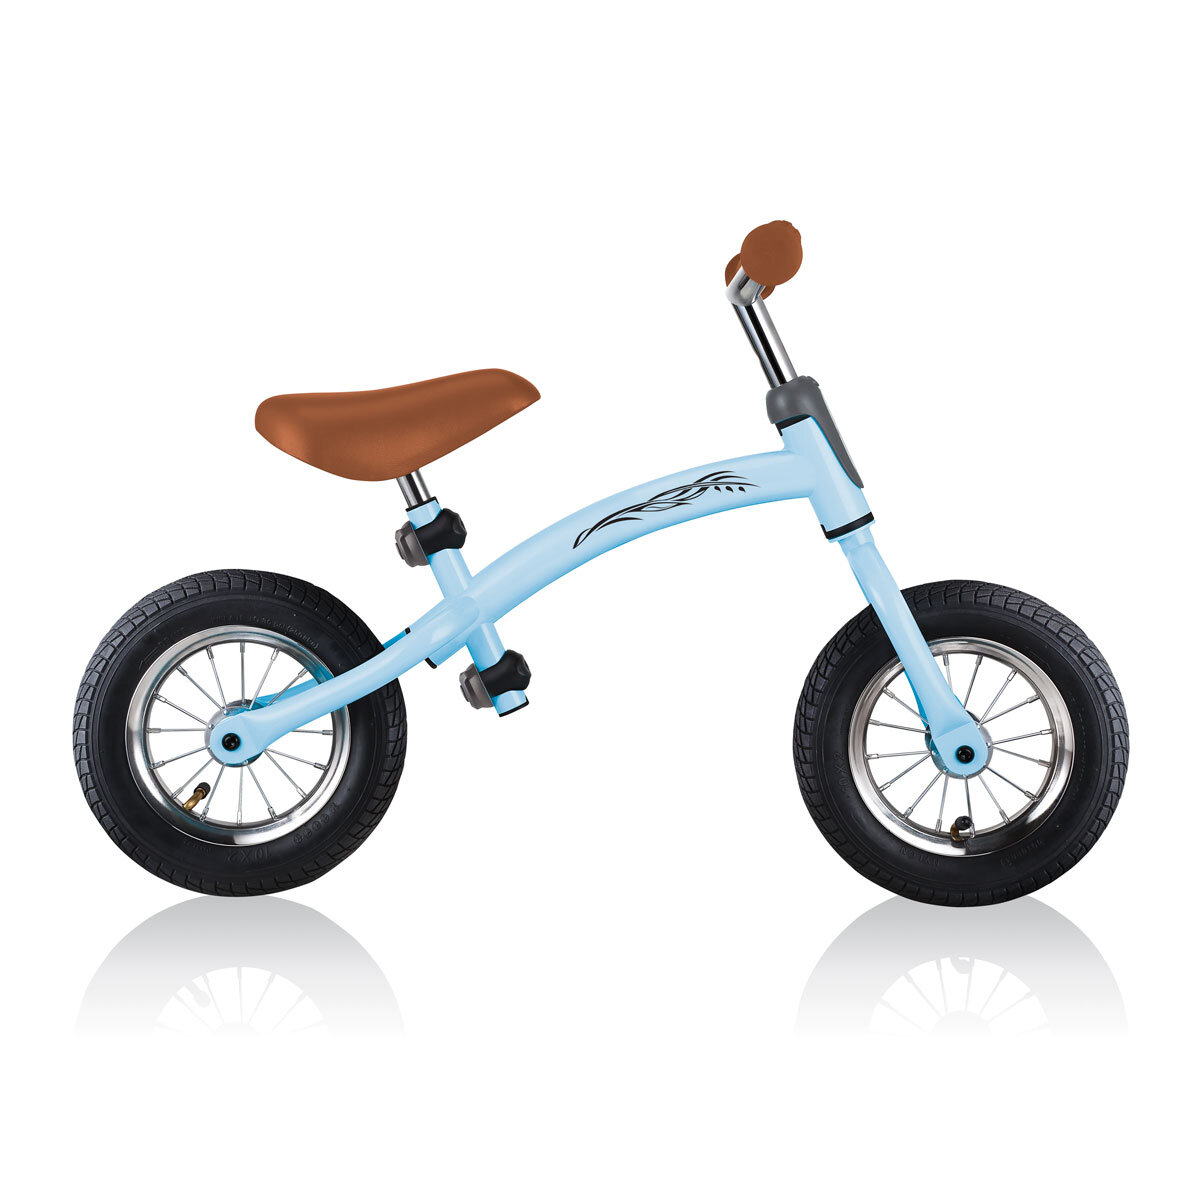 Buy Globber Go Bike Air Pastel Blue Overview4 Image at Costco.co.uk